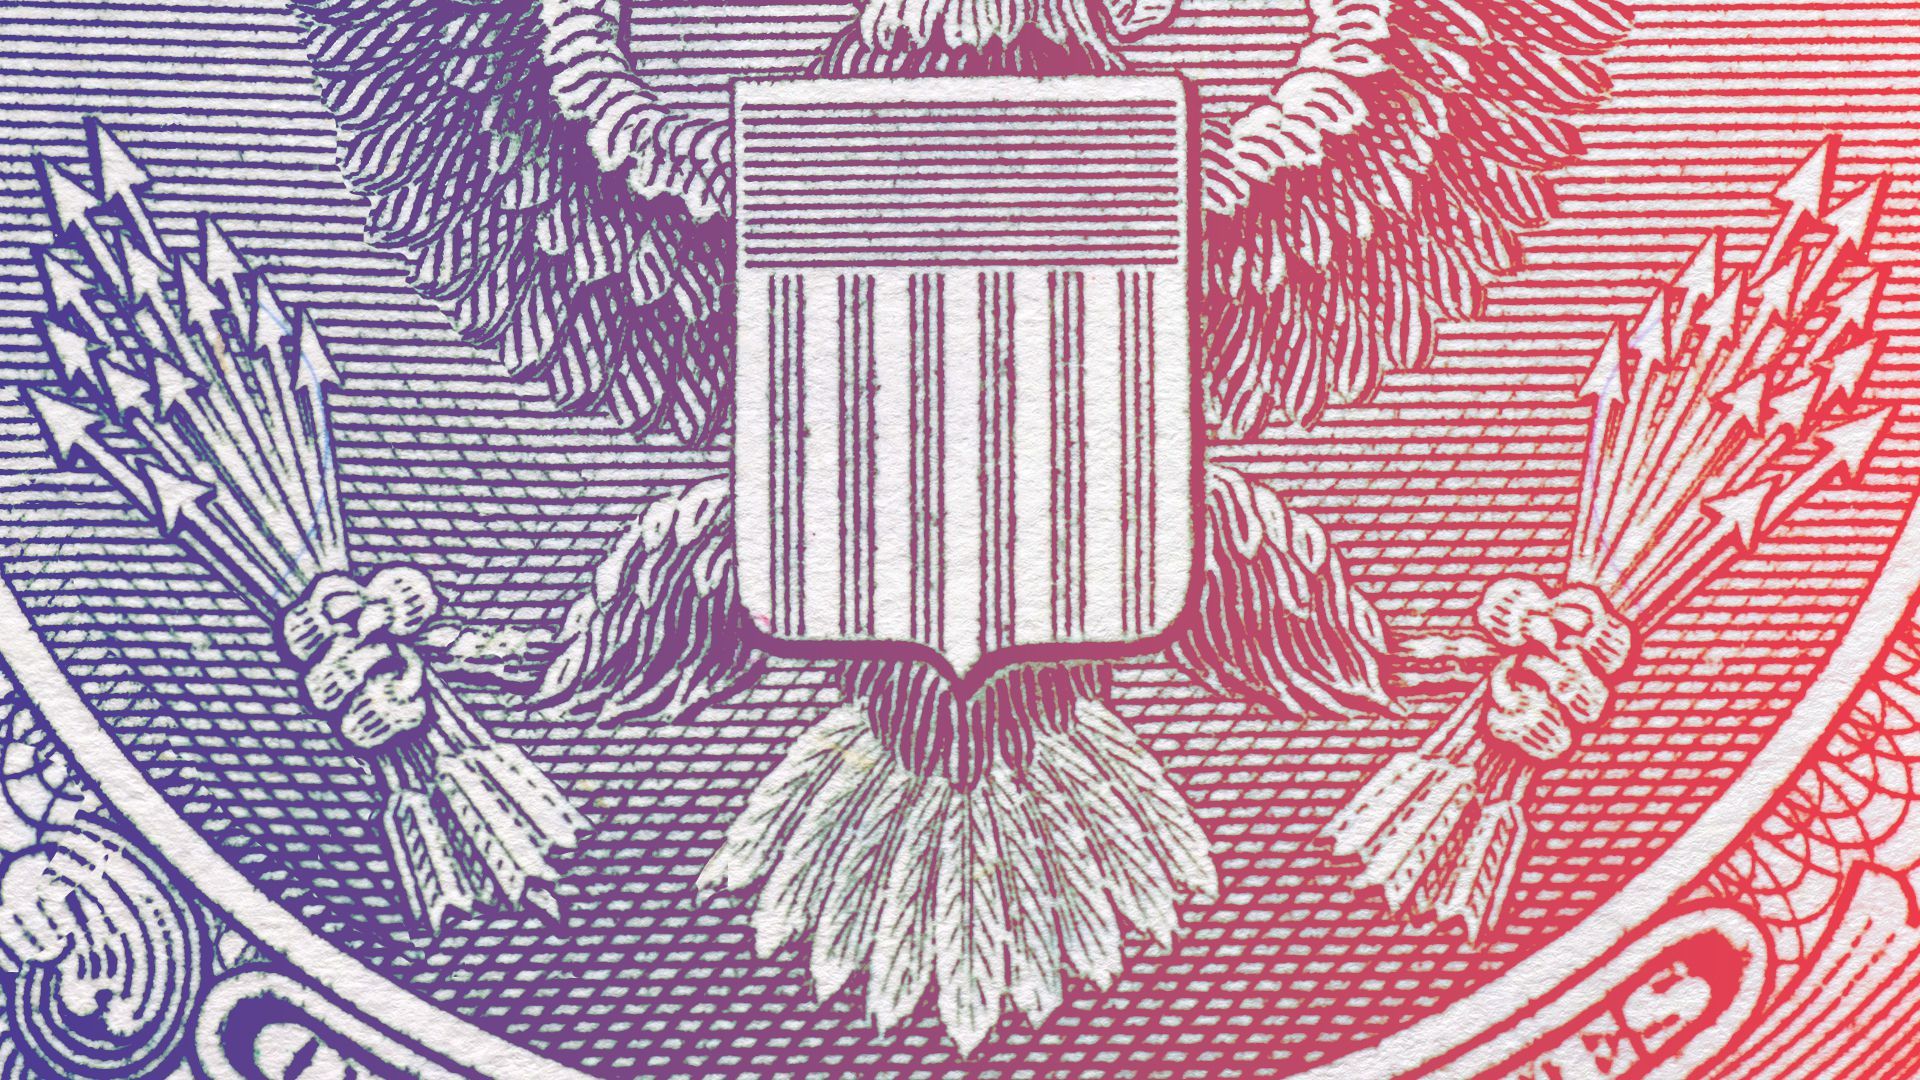 Illustration of the Great Seal of the US with the eagle holding arrows in both talons, instead of an olive branch.